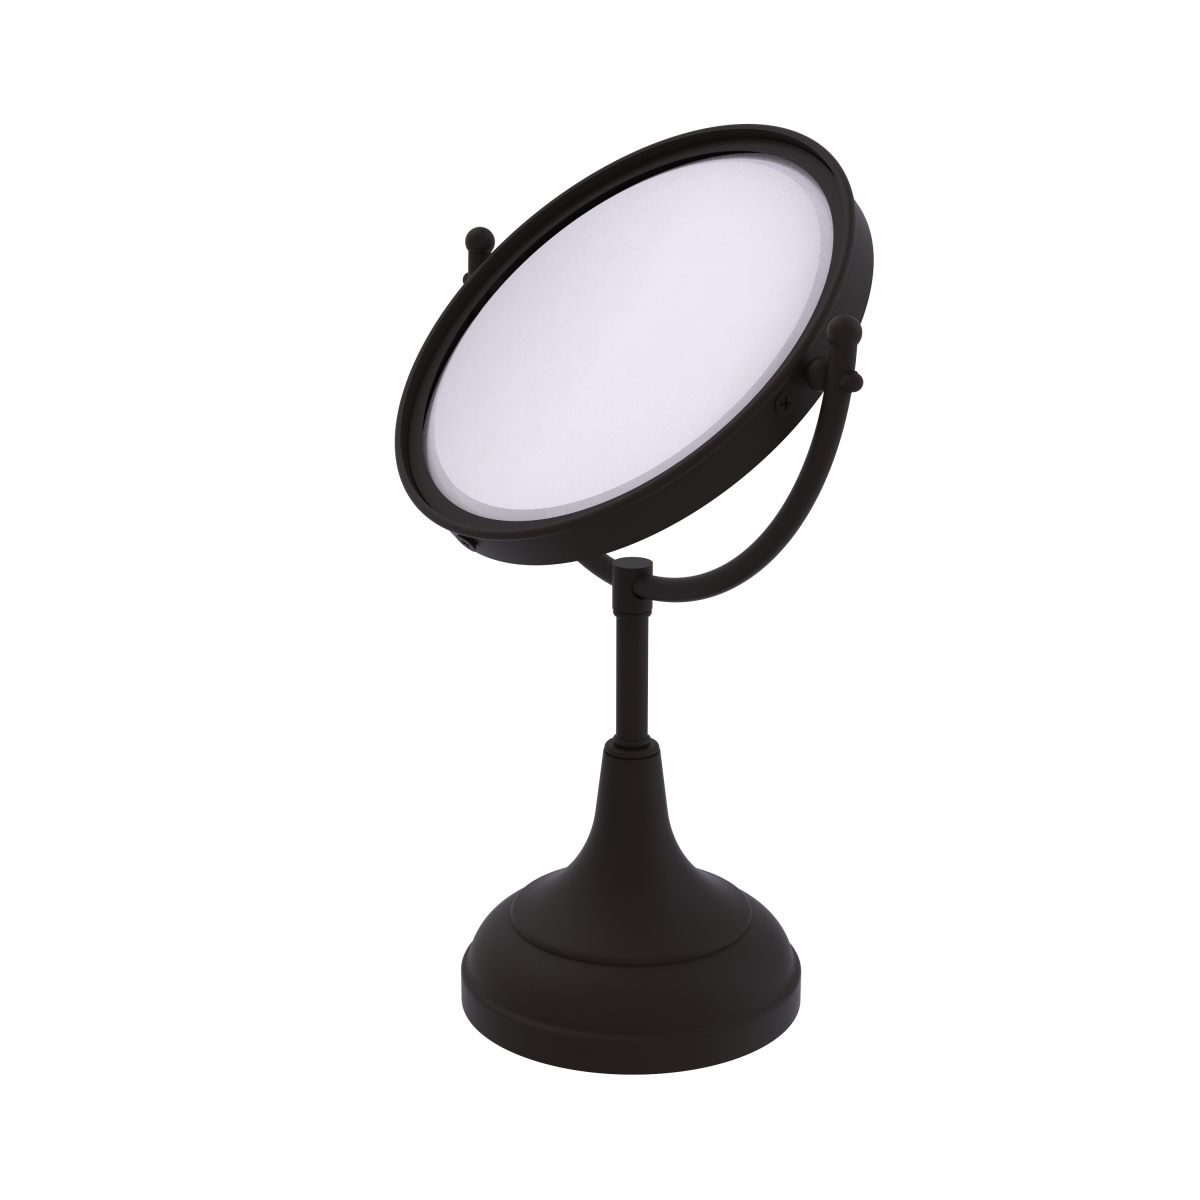 Dm-2-3x-orb Smooth Ring Style 8 In. Vanity Top Make-up Mirror 3x Magnification, Oil Rubbed Bronze